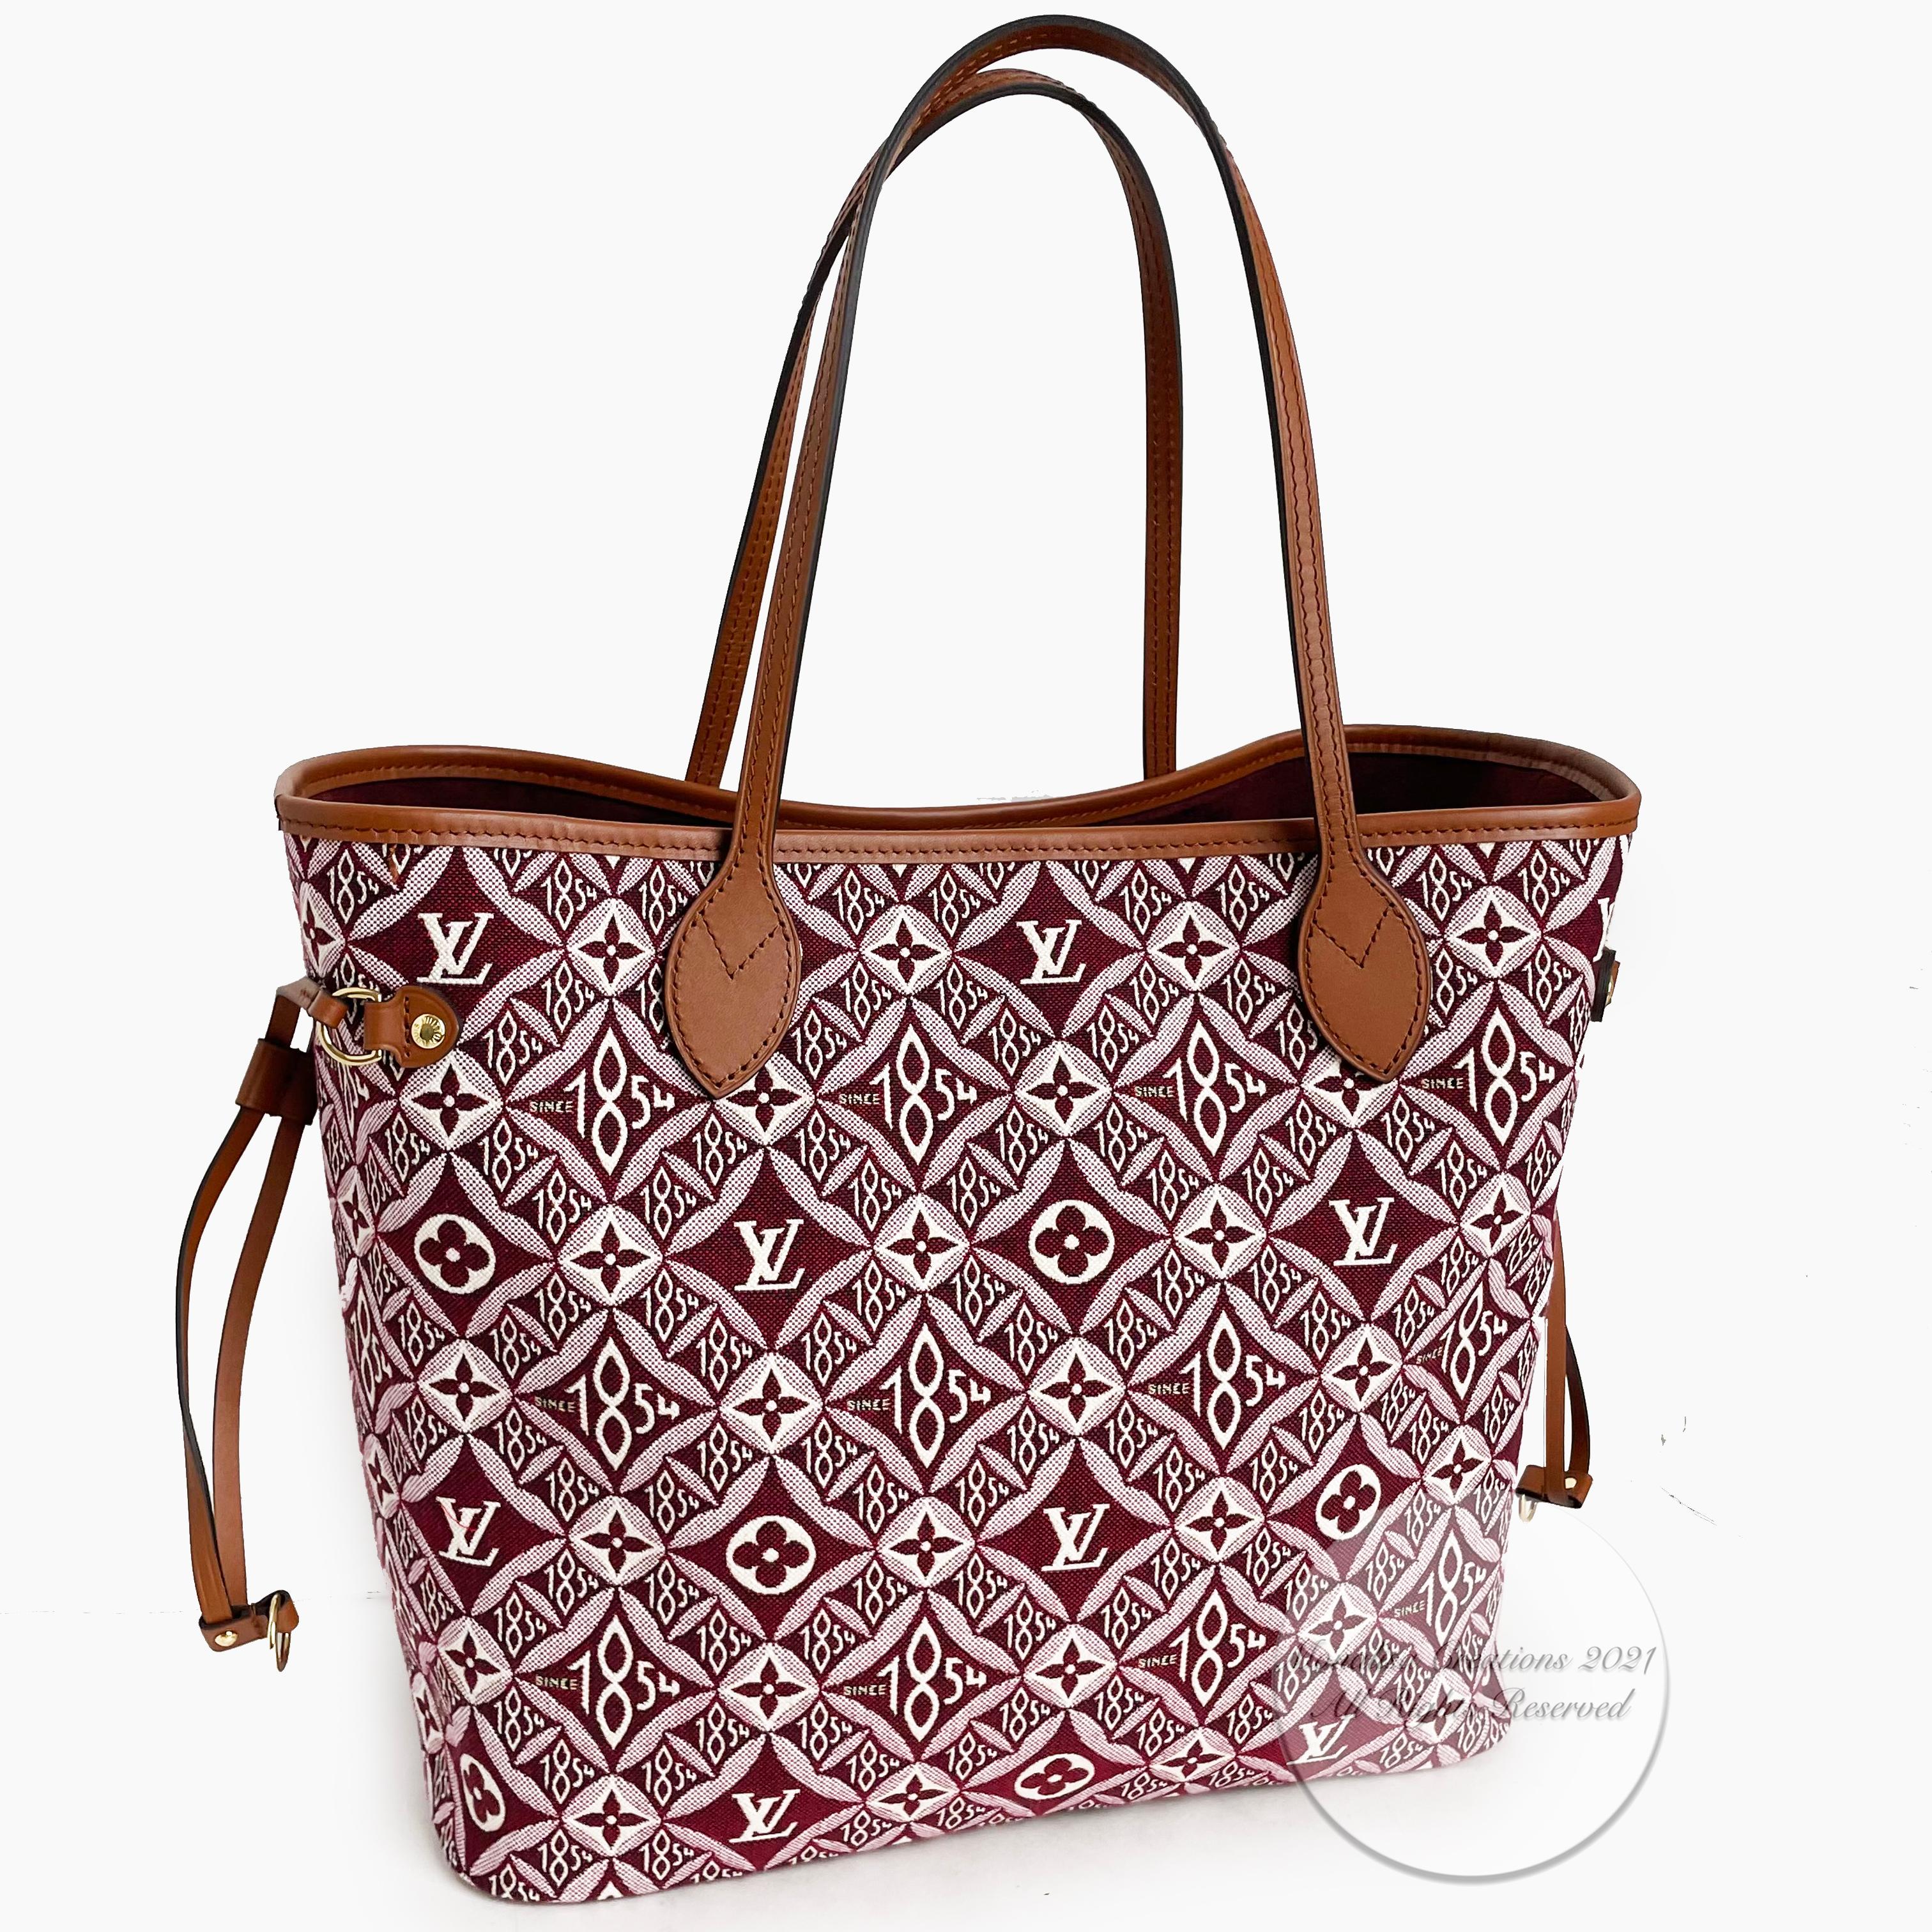 Louis Vuitton Since 1854 Neverfull Tote Bag Bordeaux + Removable Pouch in Box  2